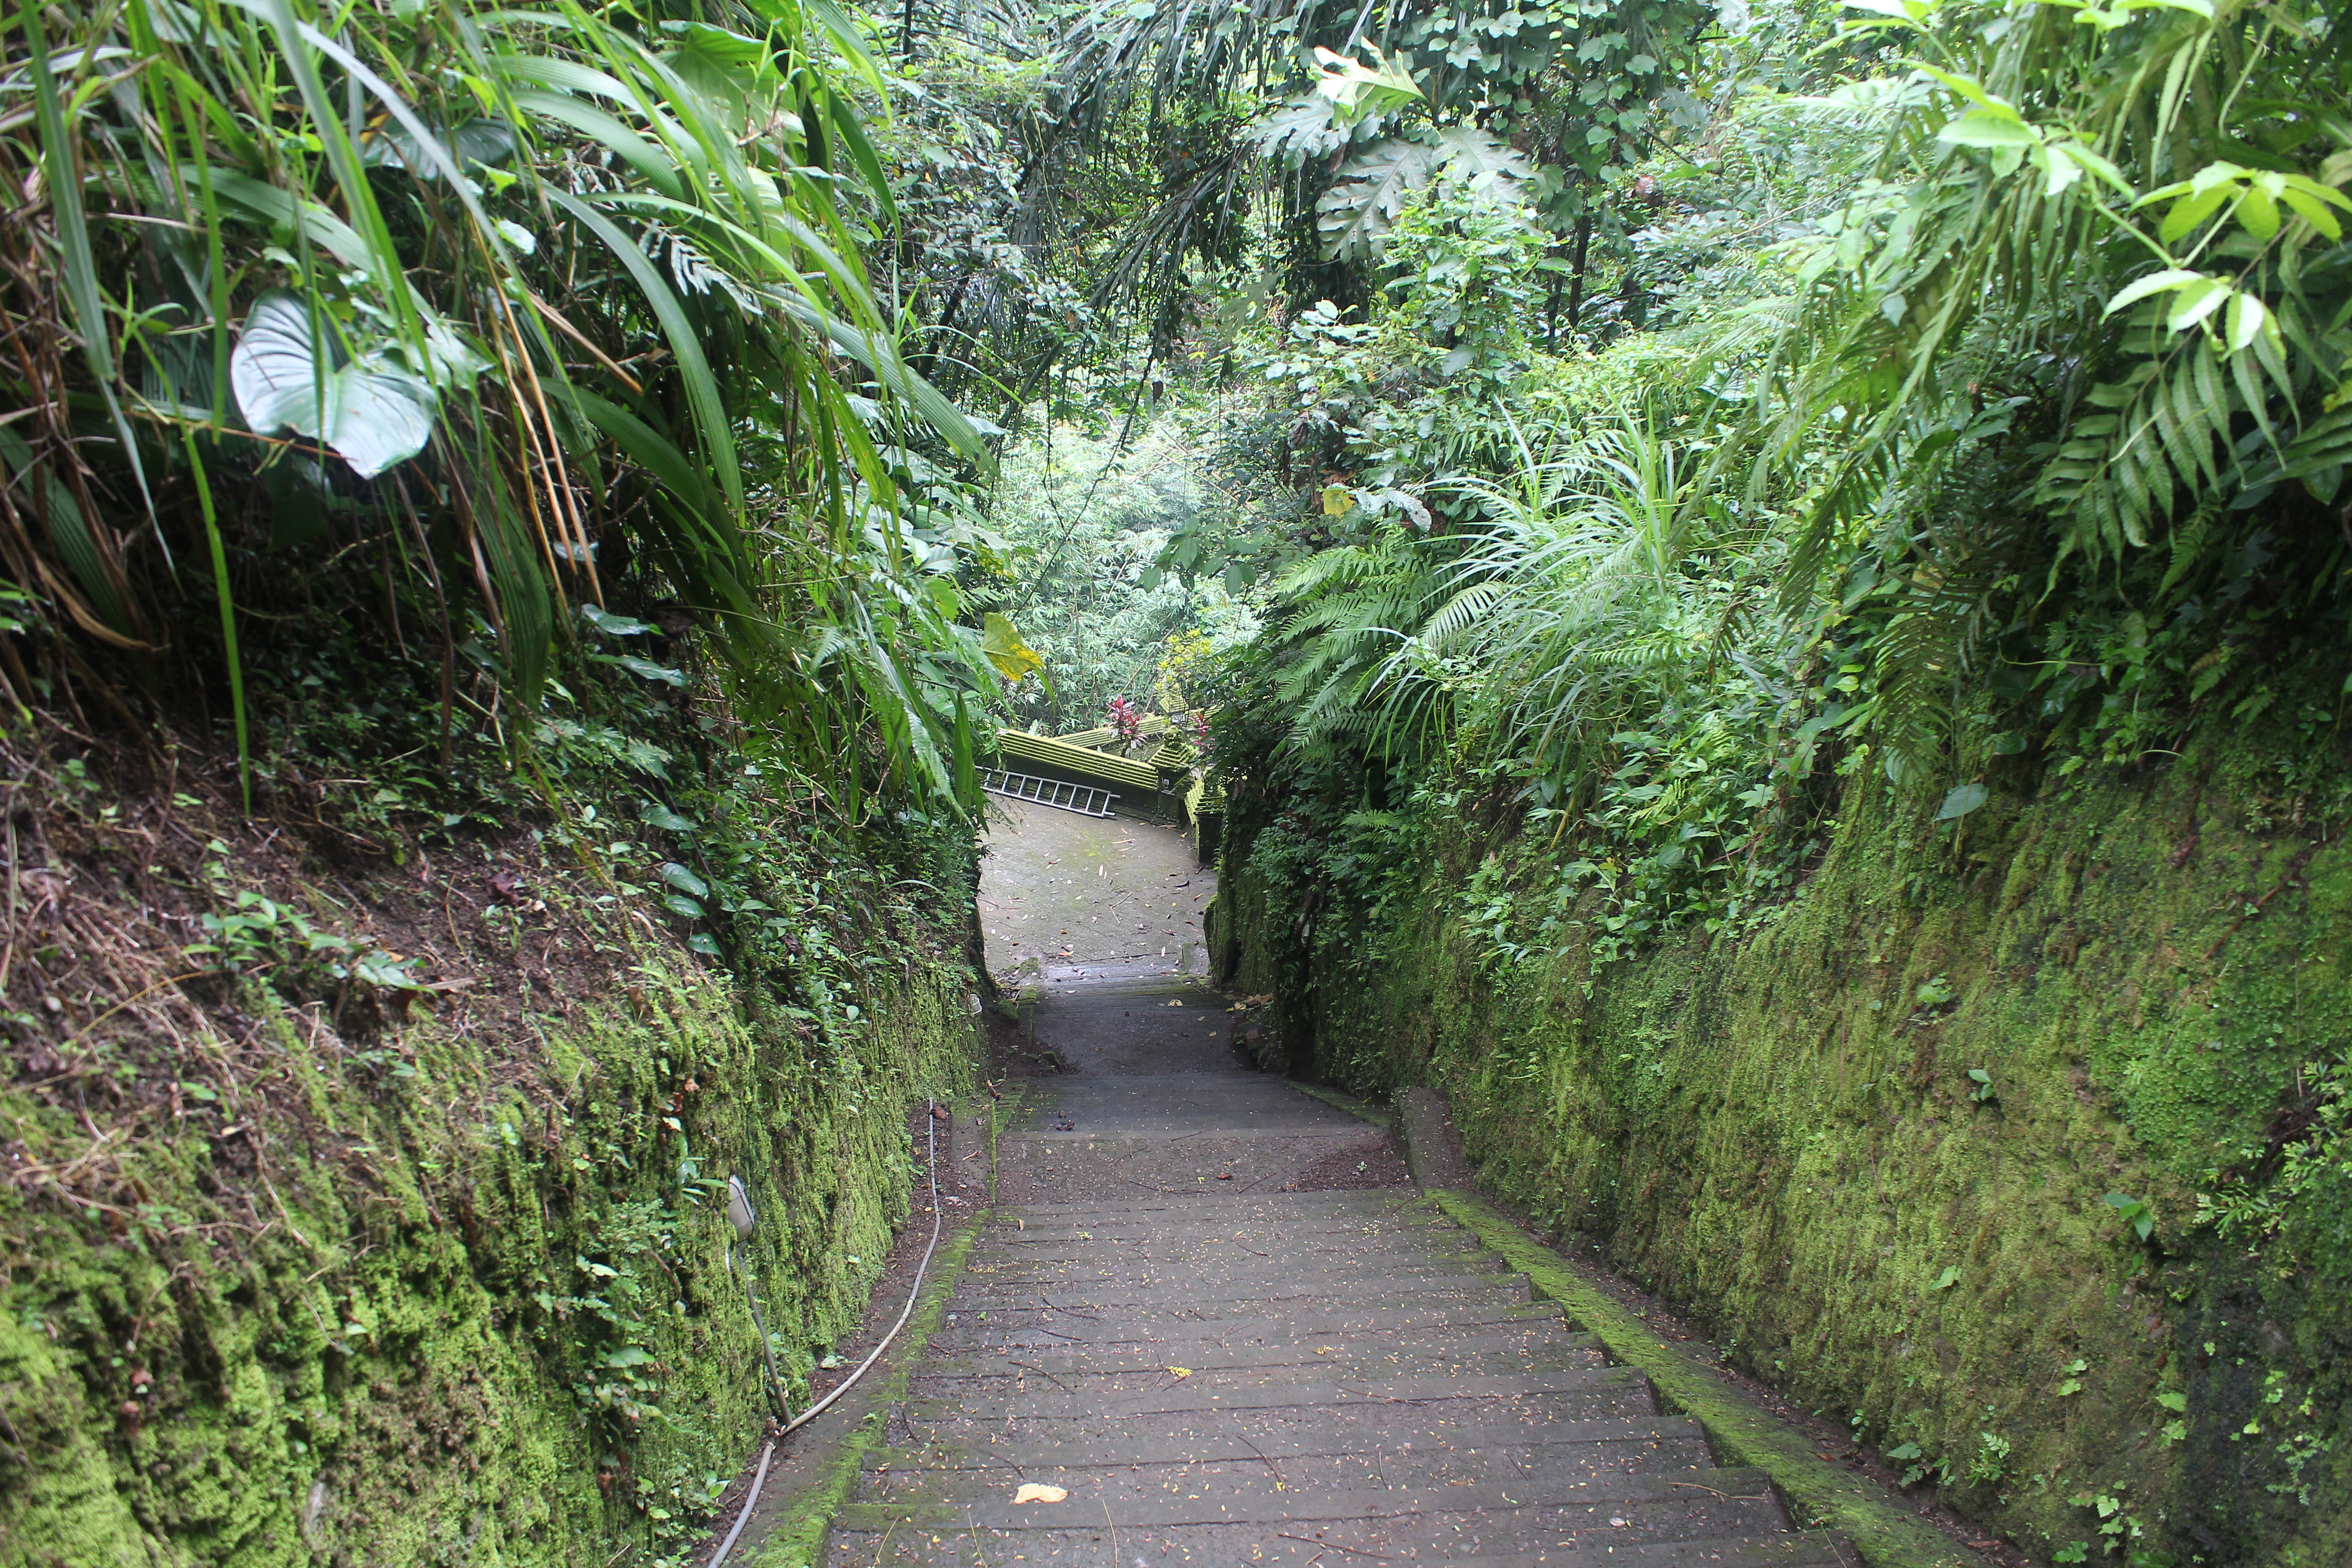 Stairs leading down steeply, with lichen-covered walls on both sides